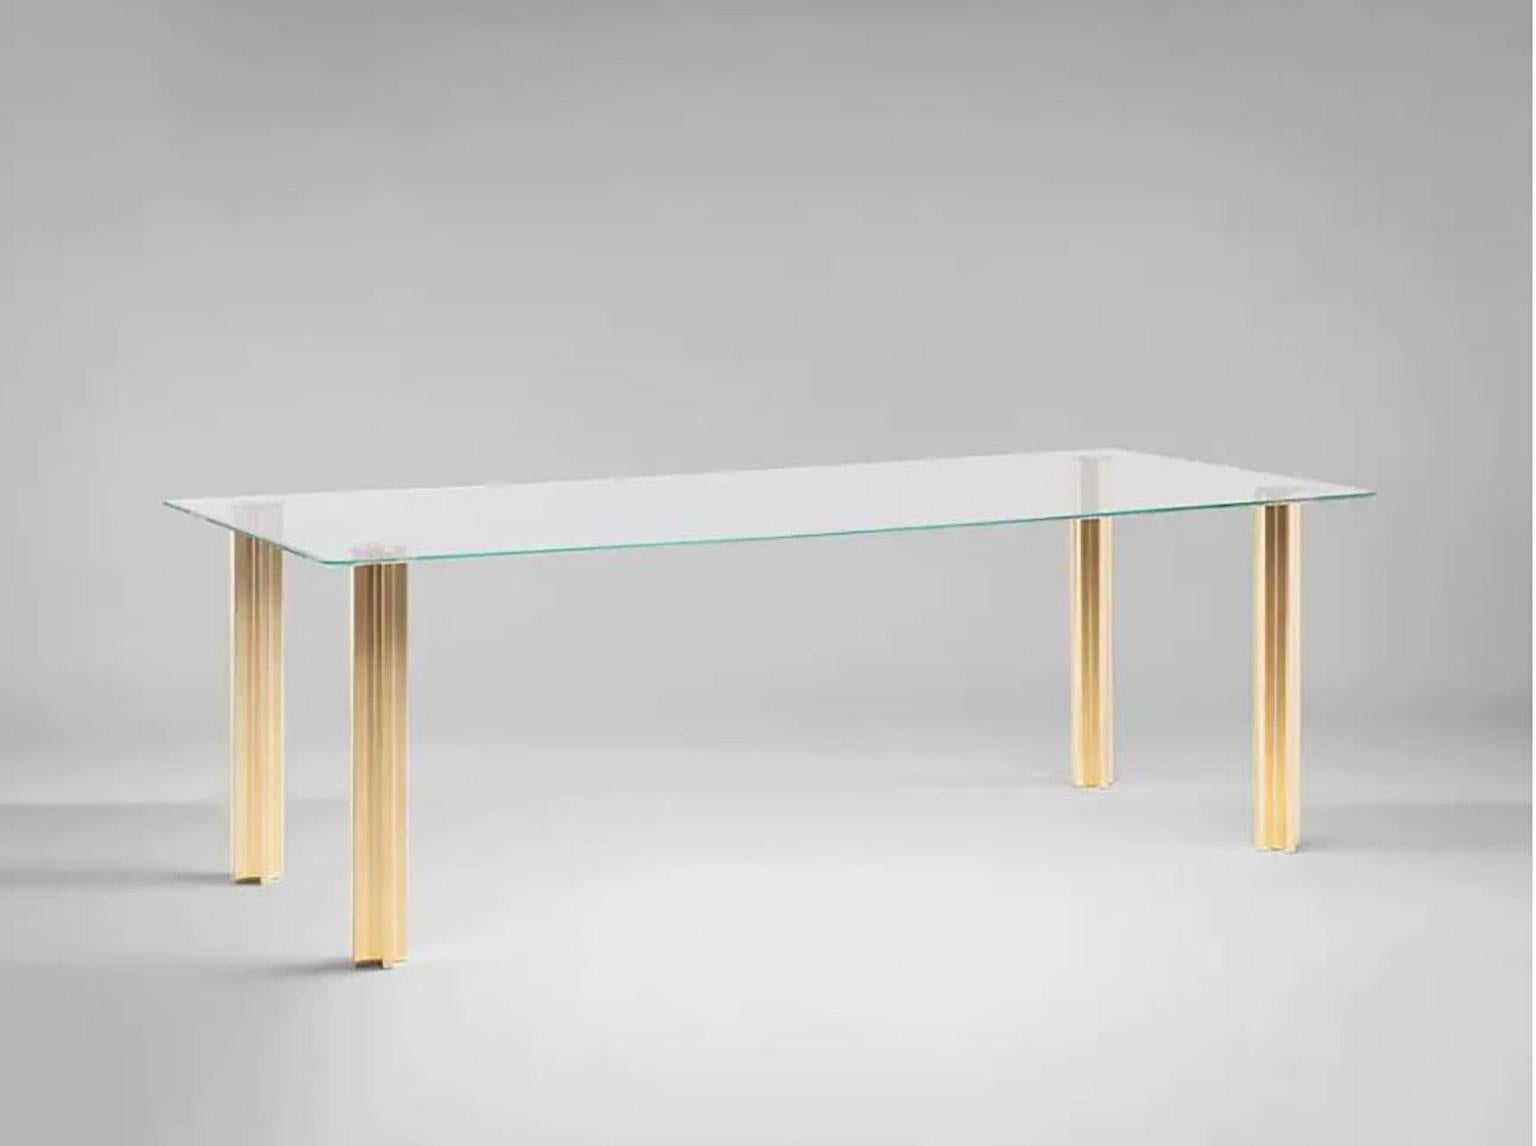 Sem Gold collection, rectangular table with glass top: extra light transparent glass or smoke grey transparent glass (12 mm thick). Plated aluminium legs finished in 24-karat polished or fine brushed yellow gold. The Gold collection has a range of